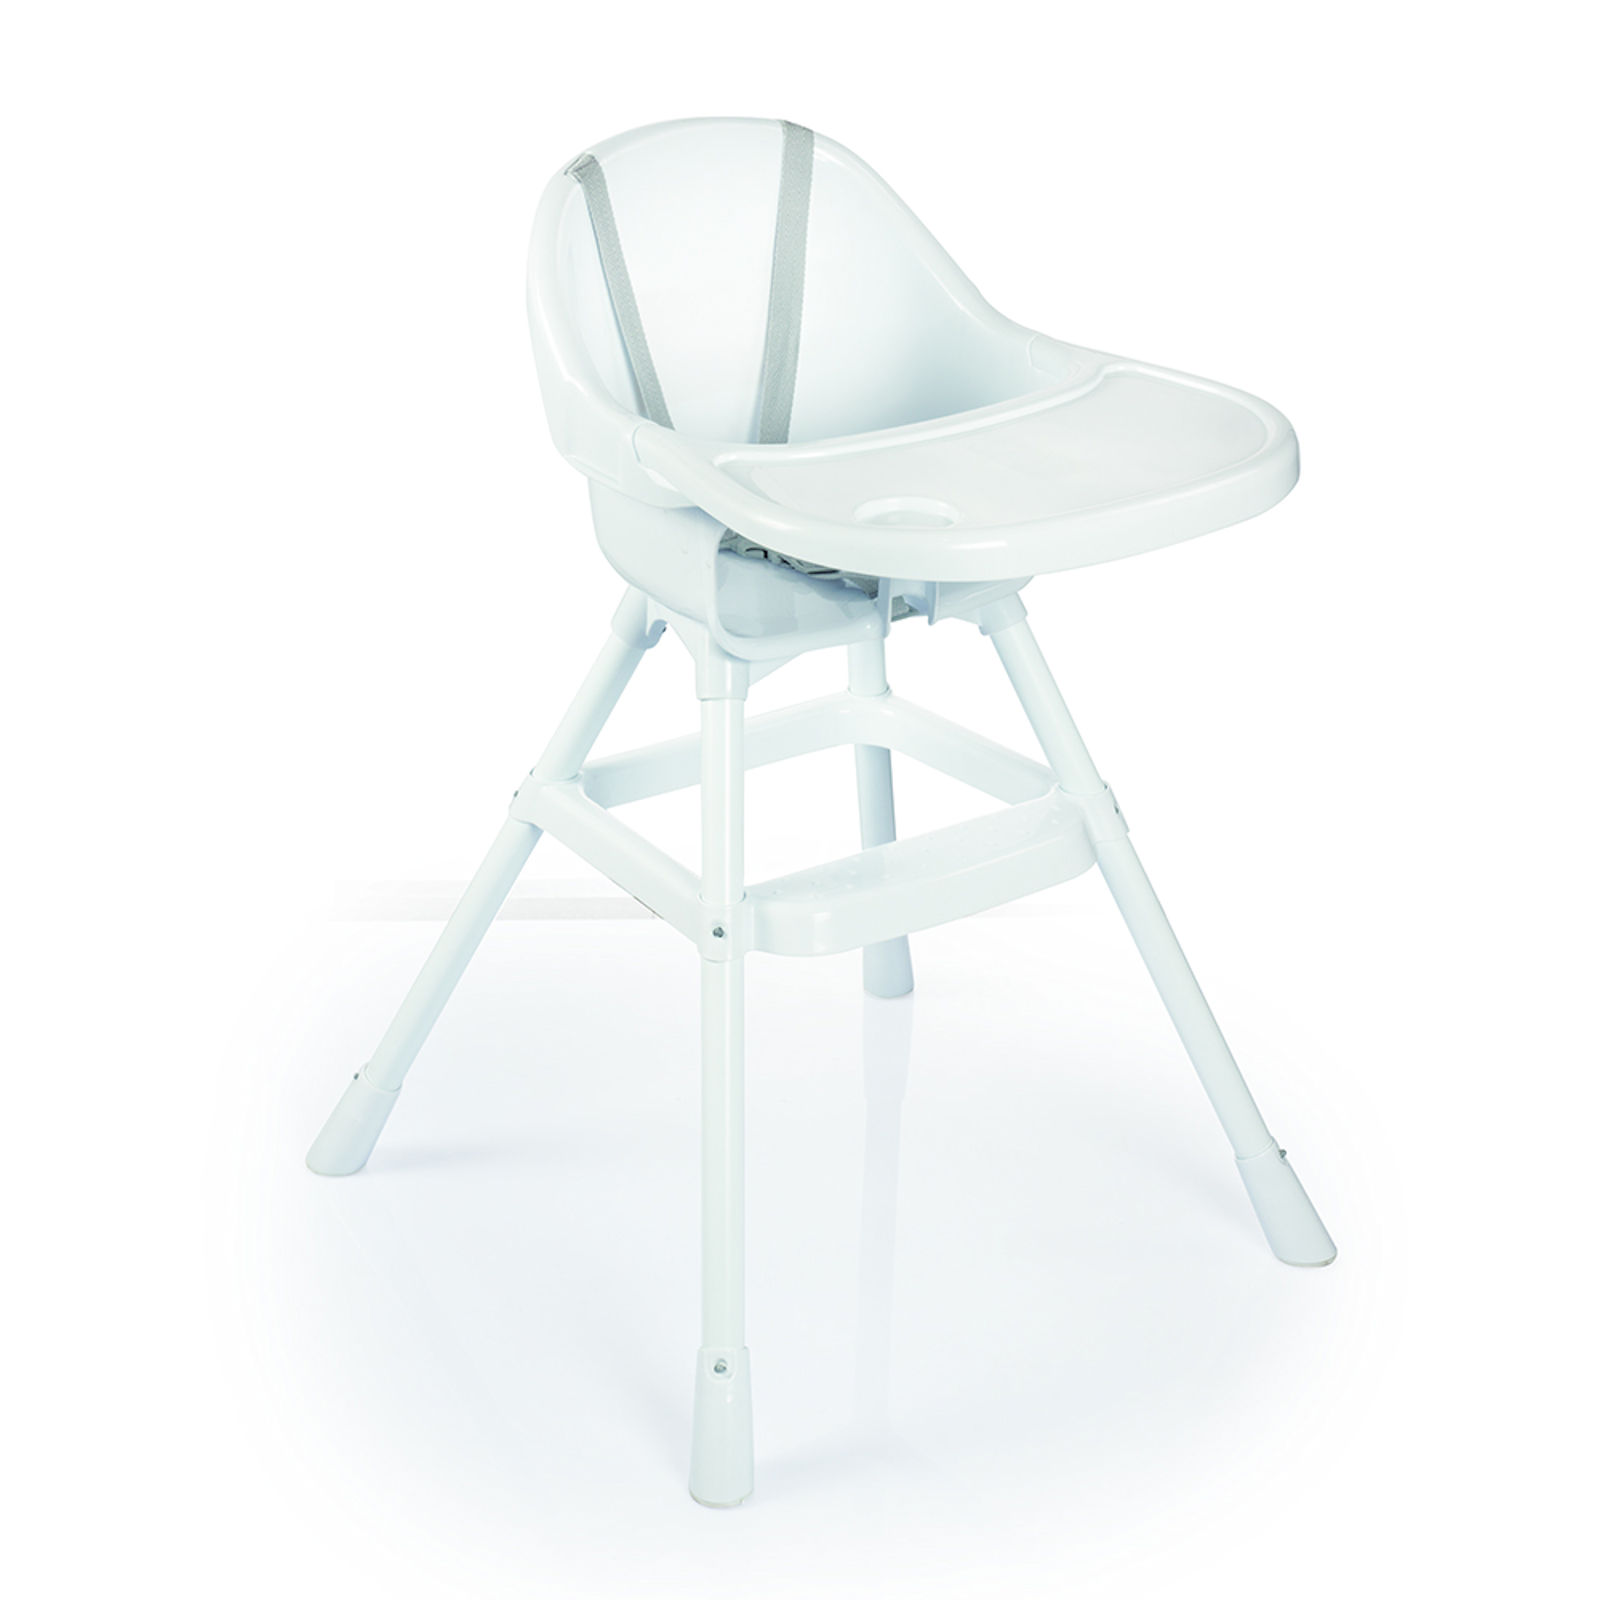 Compact Baby Toddler Highchair - White...